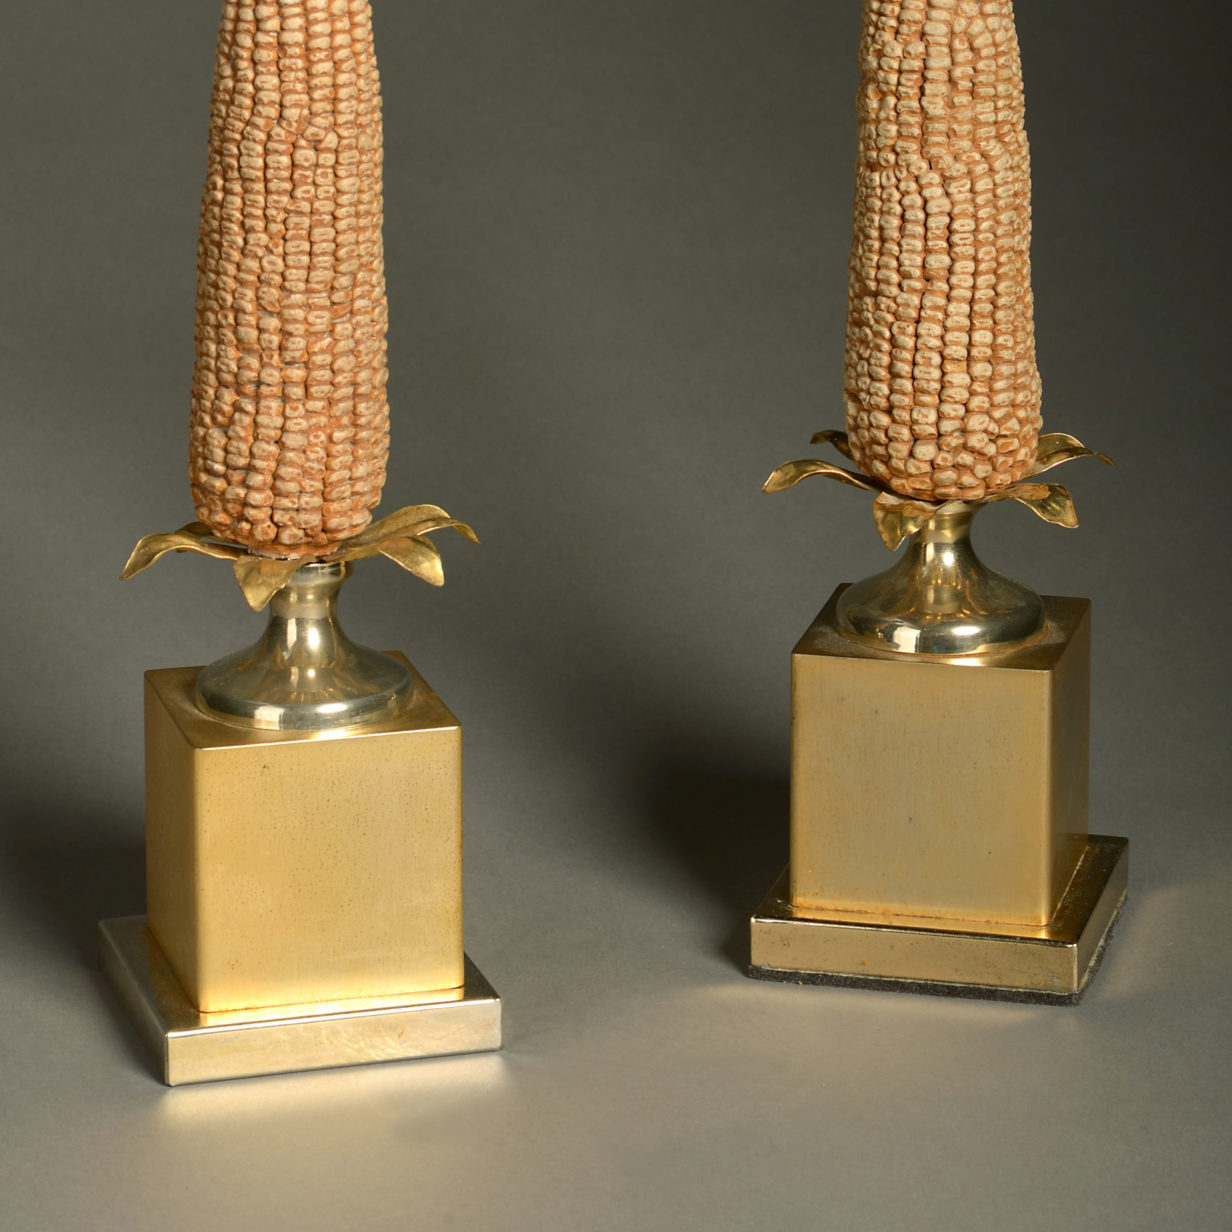 A pair of mid-century lamps - manner of maison charles